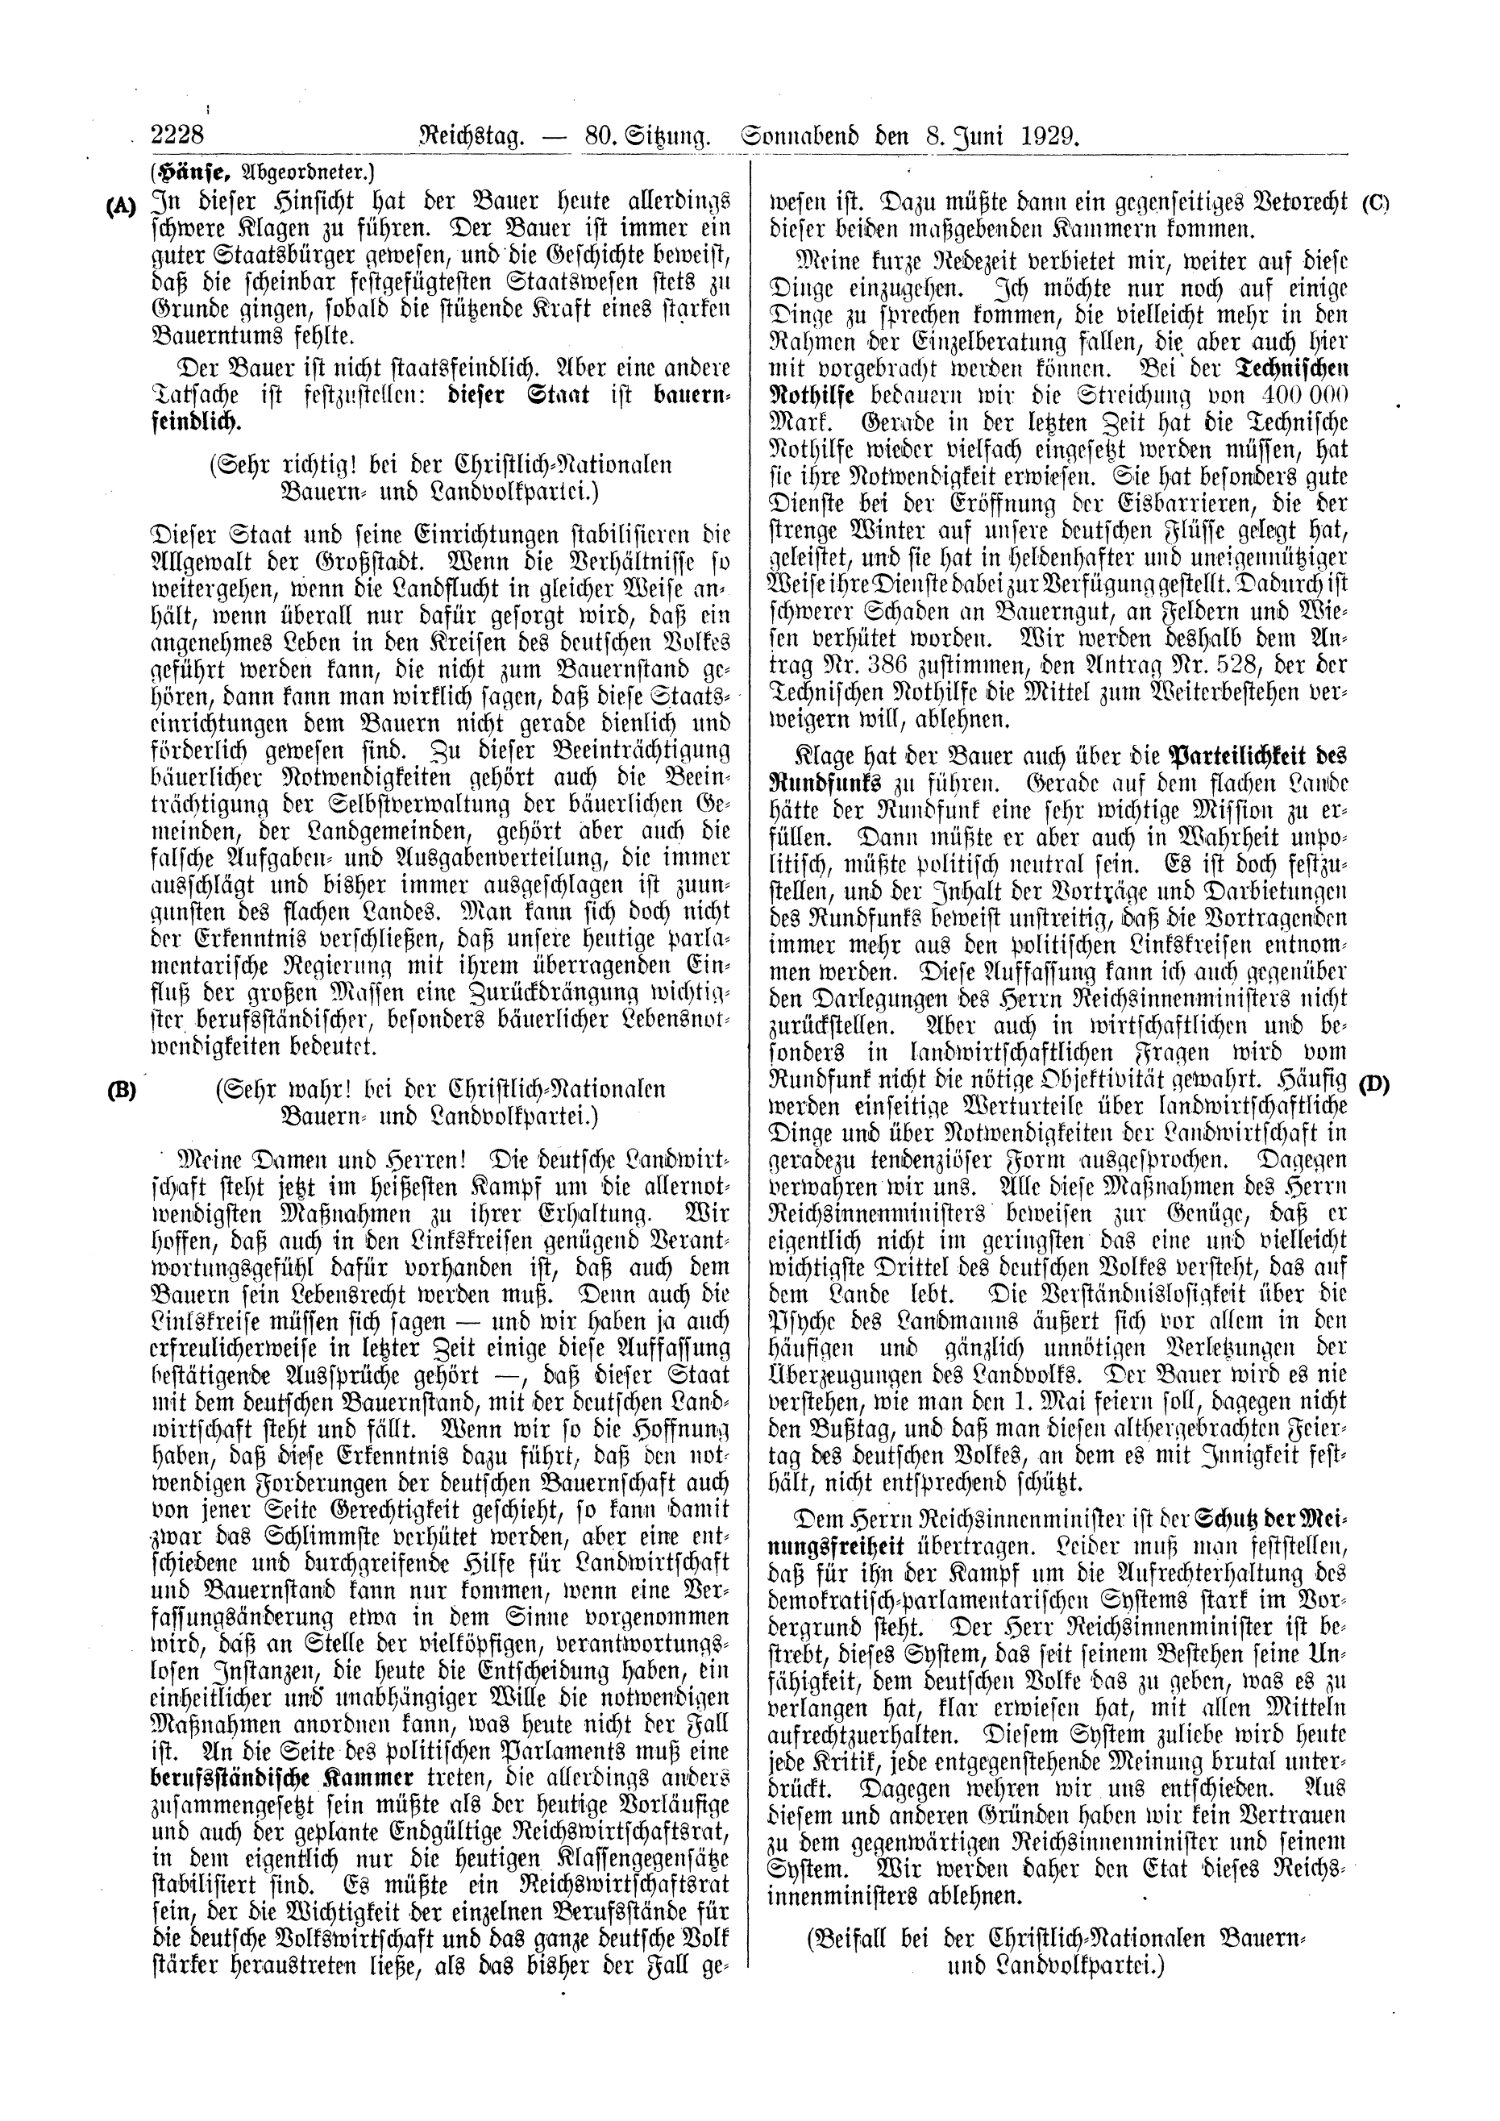 Scan of page 2228